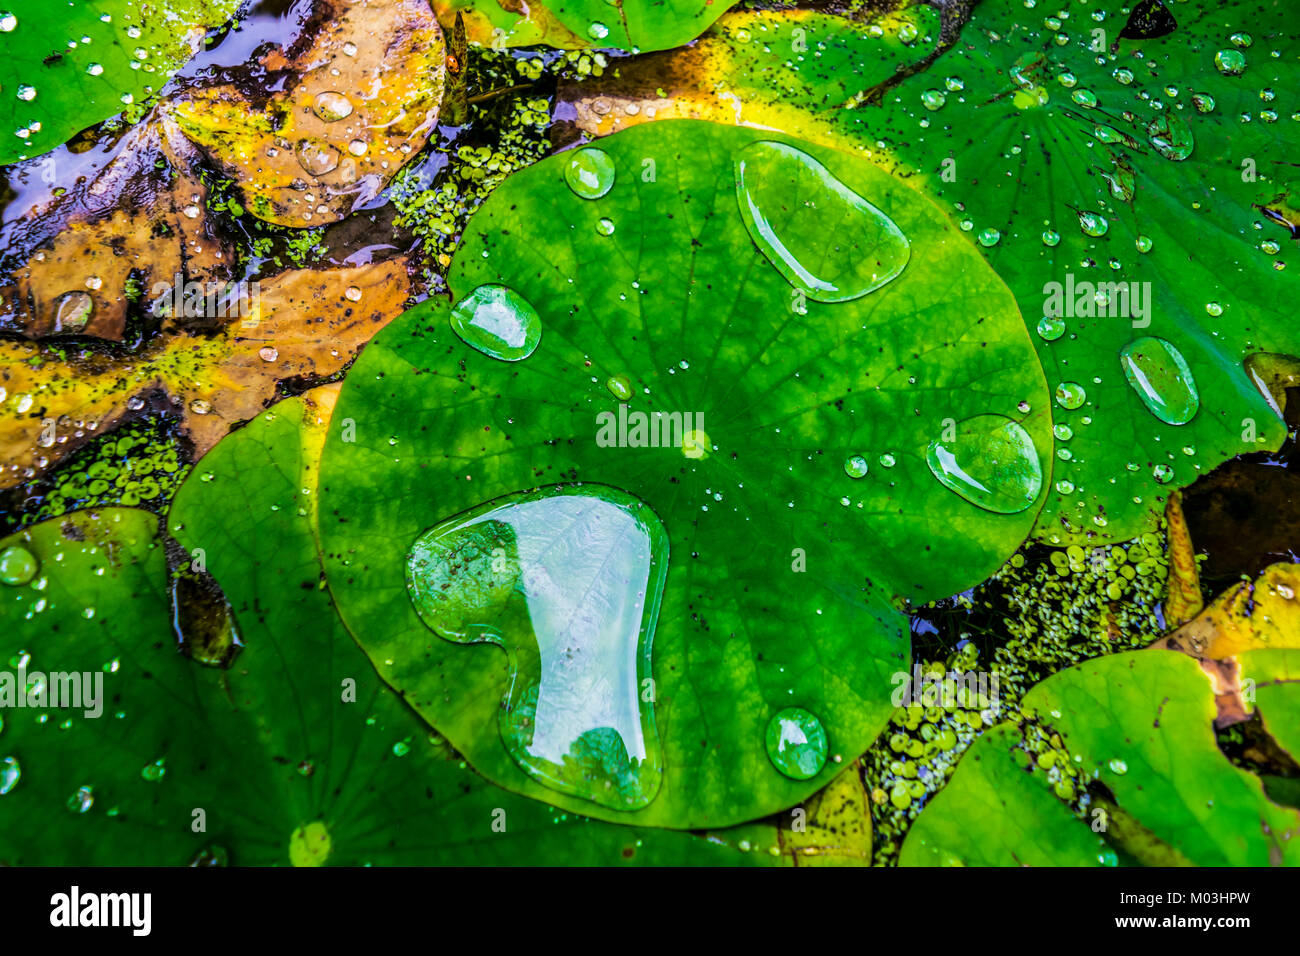 Water lily leaves with water drops, closeup. Green waxy leaves floating on water, after rain. Stock Photo